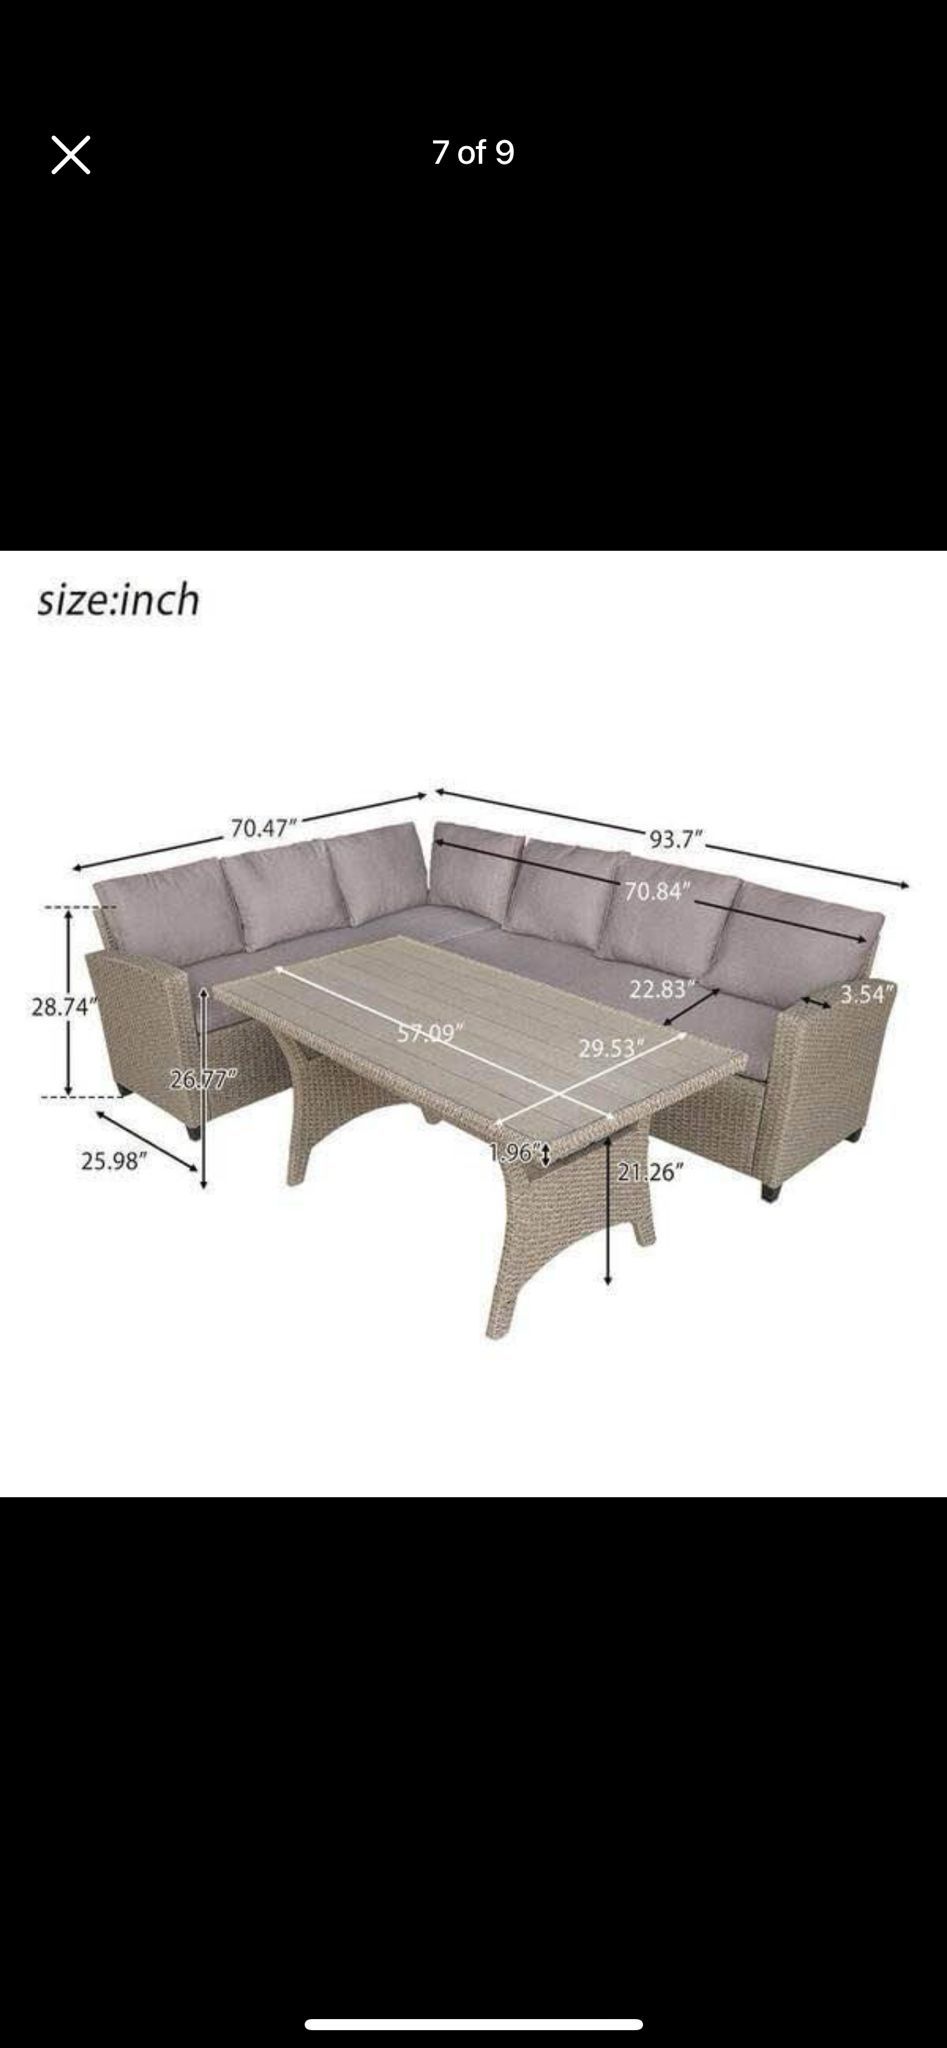 Patio Furniture Set With Center Table Cushion Comes In 3 Box